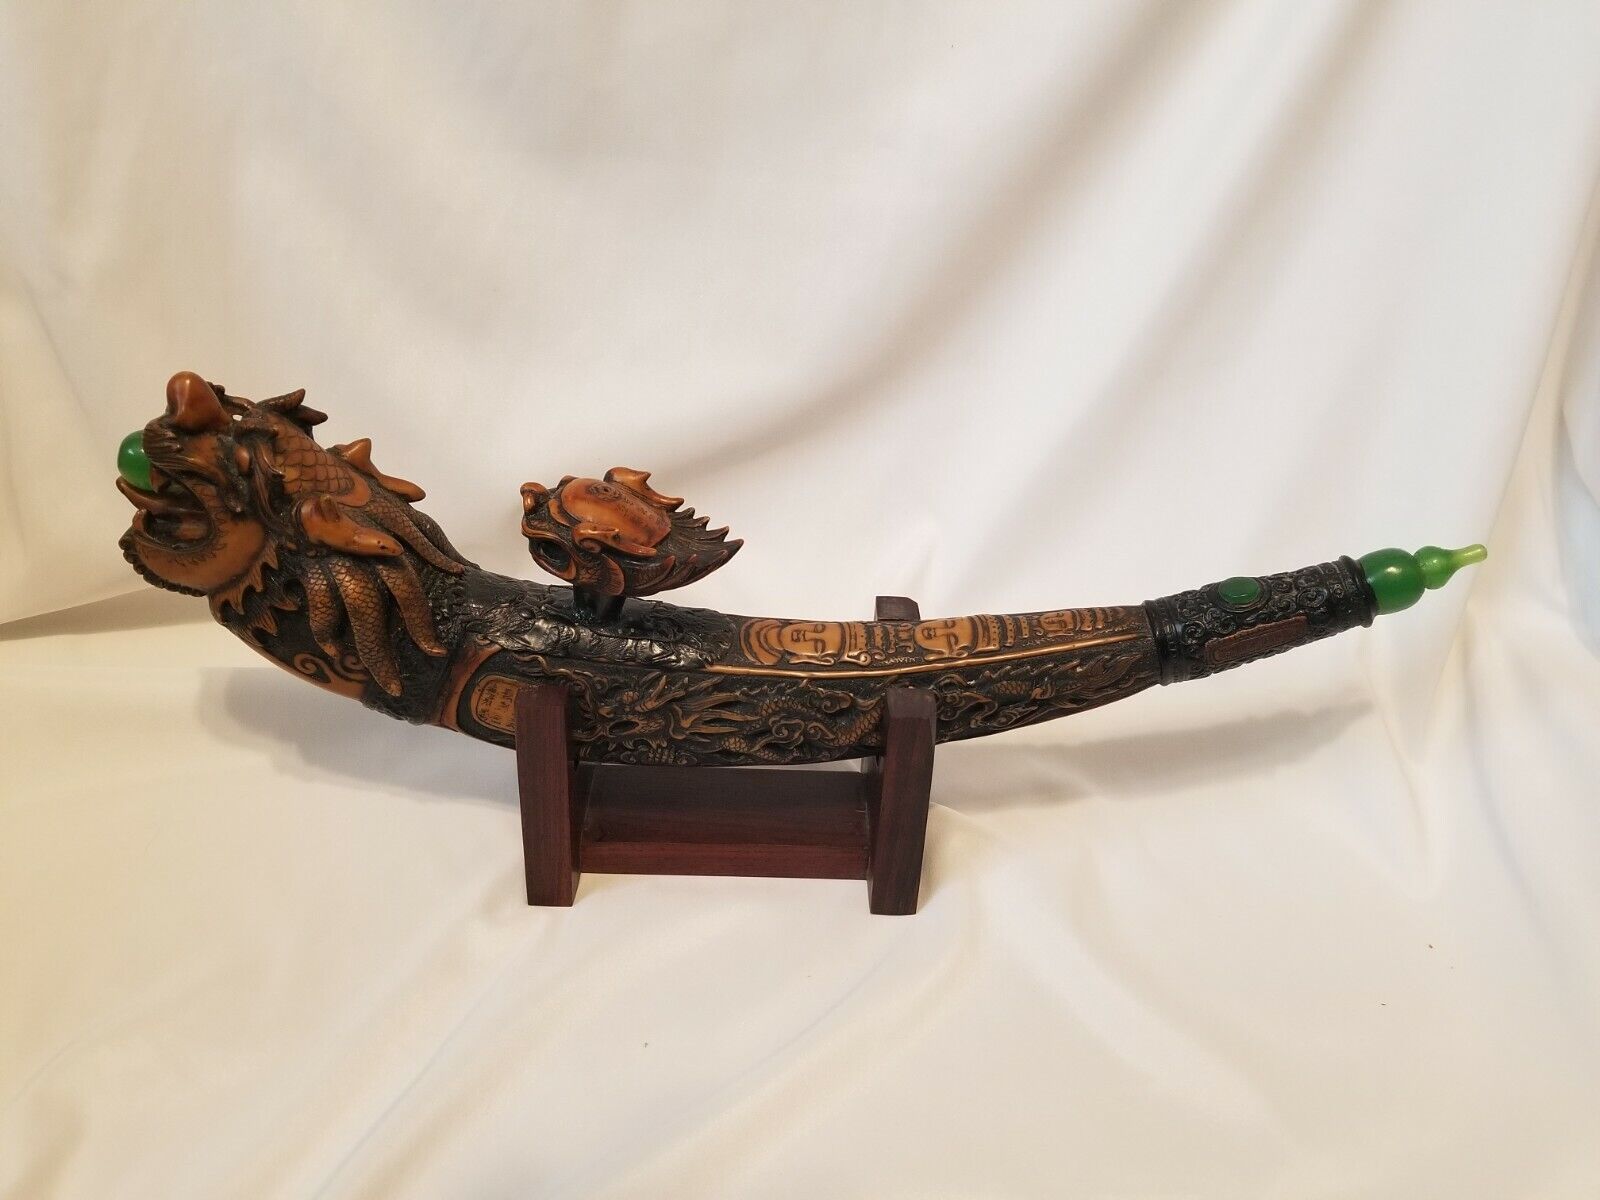 Antique Dragon Pipe, Heavily Decorated and With Jade